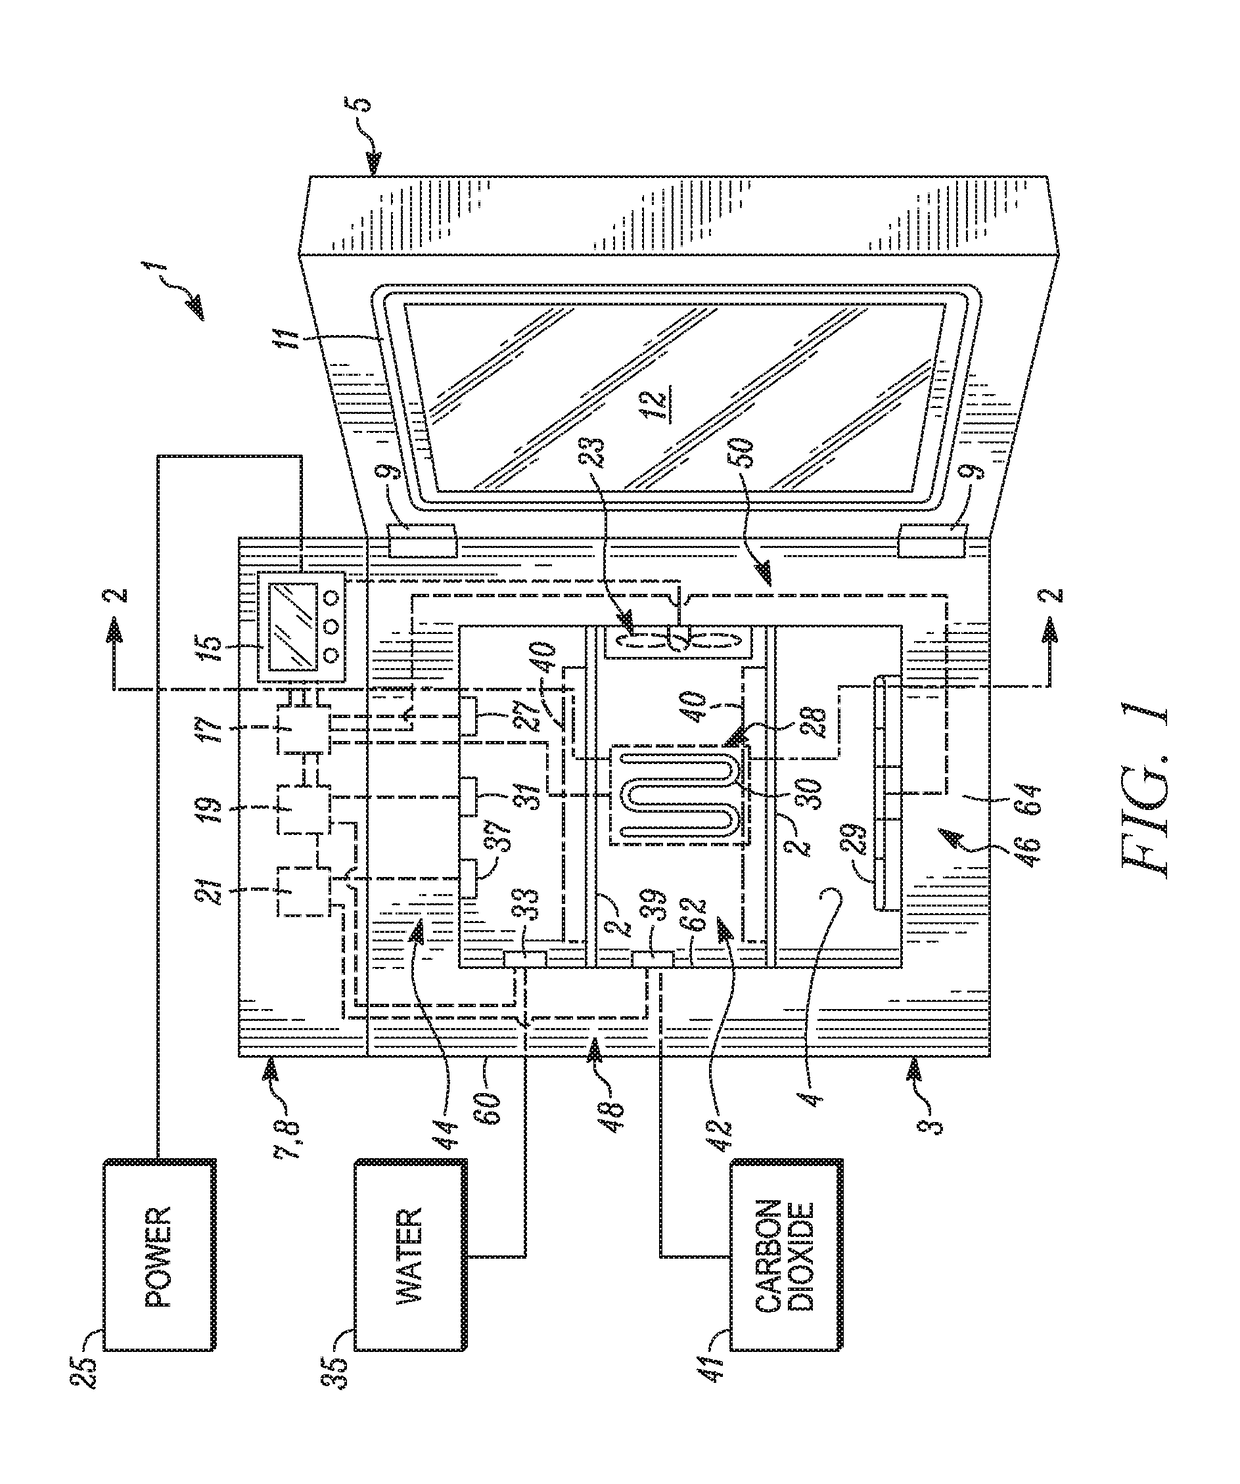 Insulated chamber with packetized phase change material